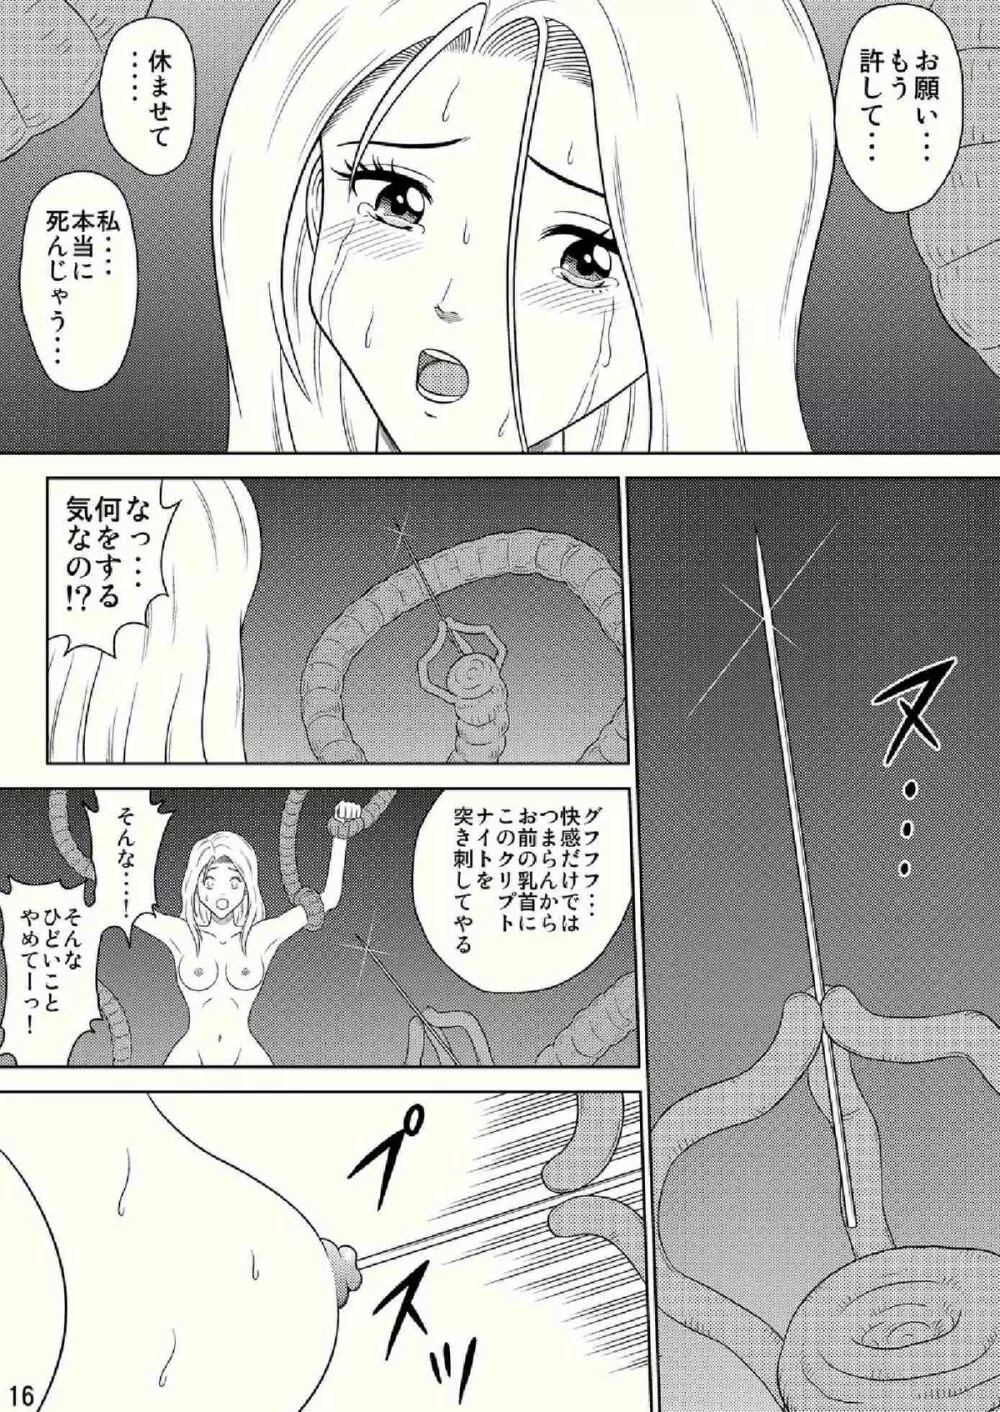 Toukikoubou vol.2 SUPER GIRL - Humiliation and Execution - Page.16